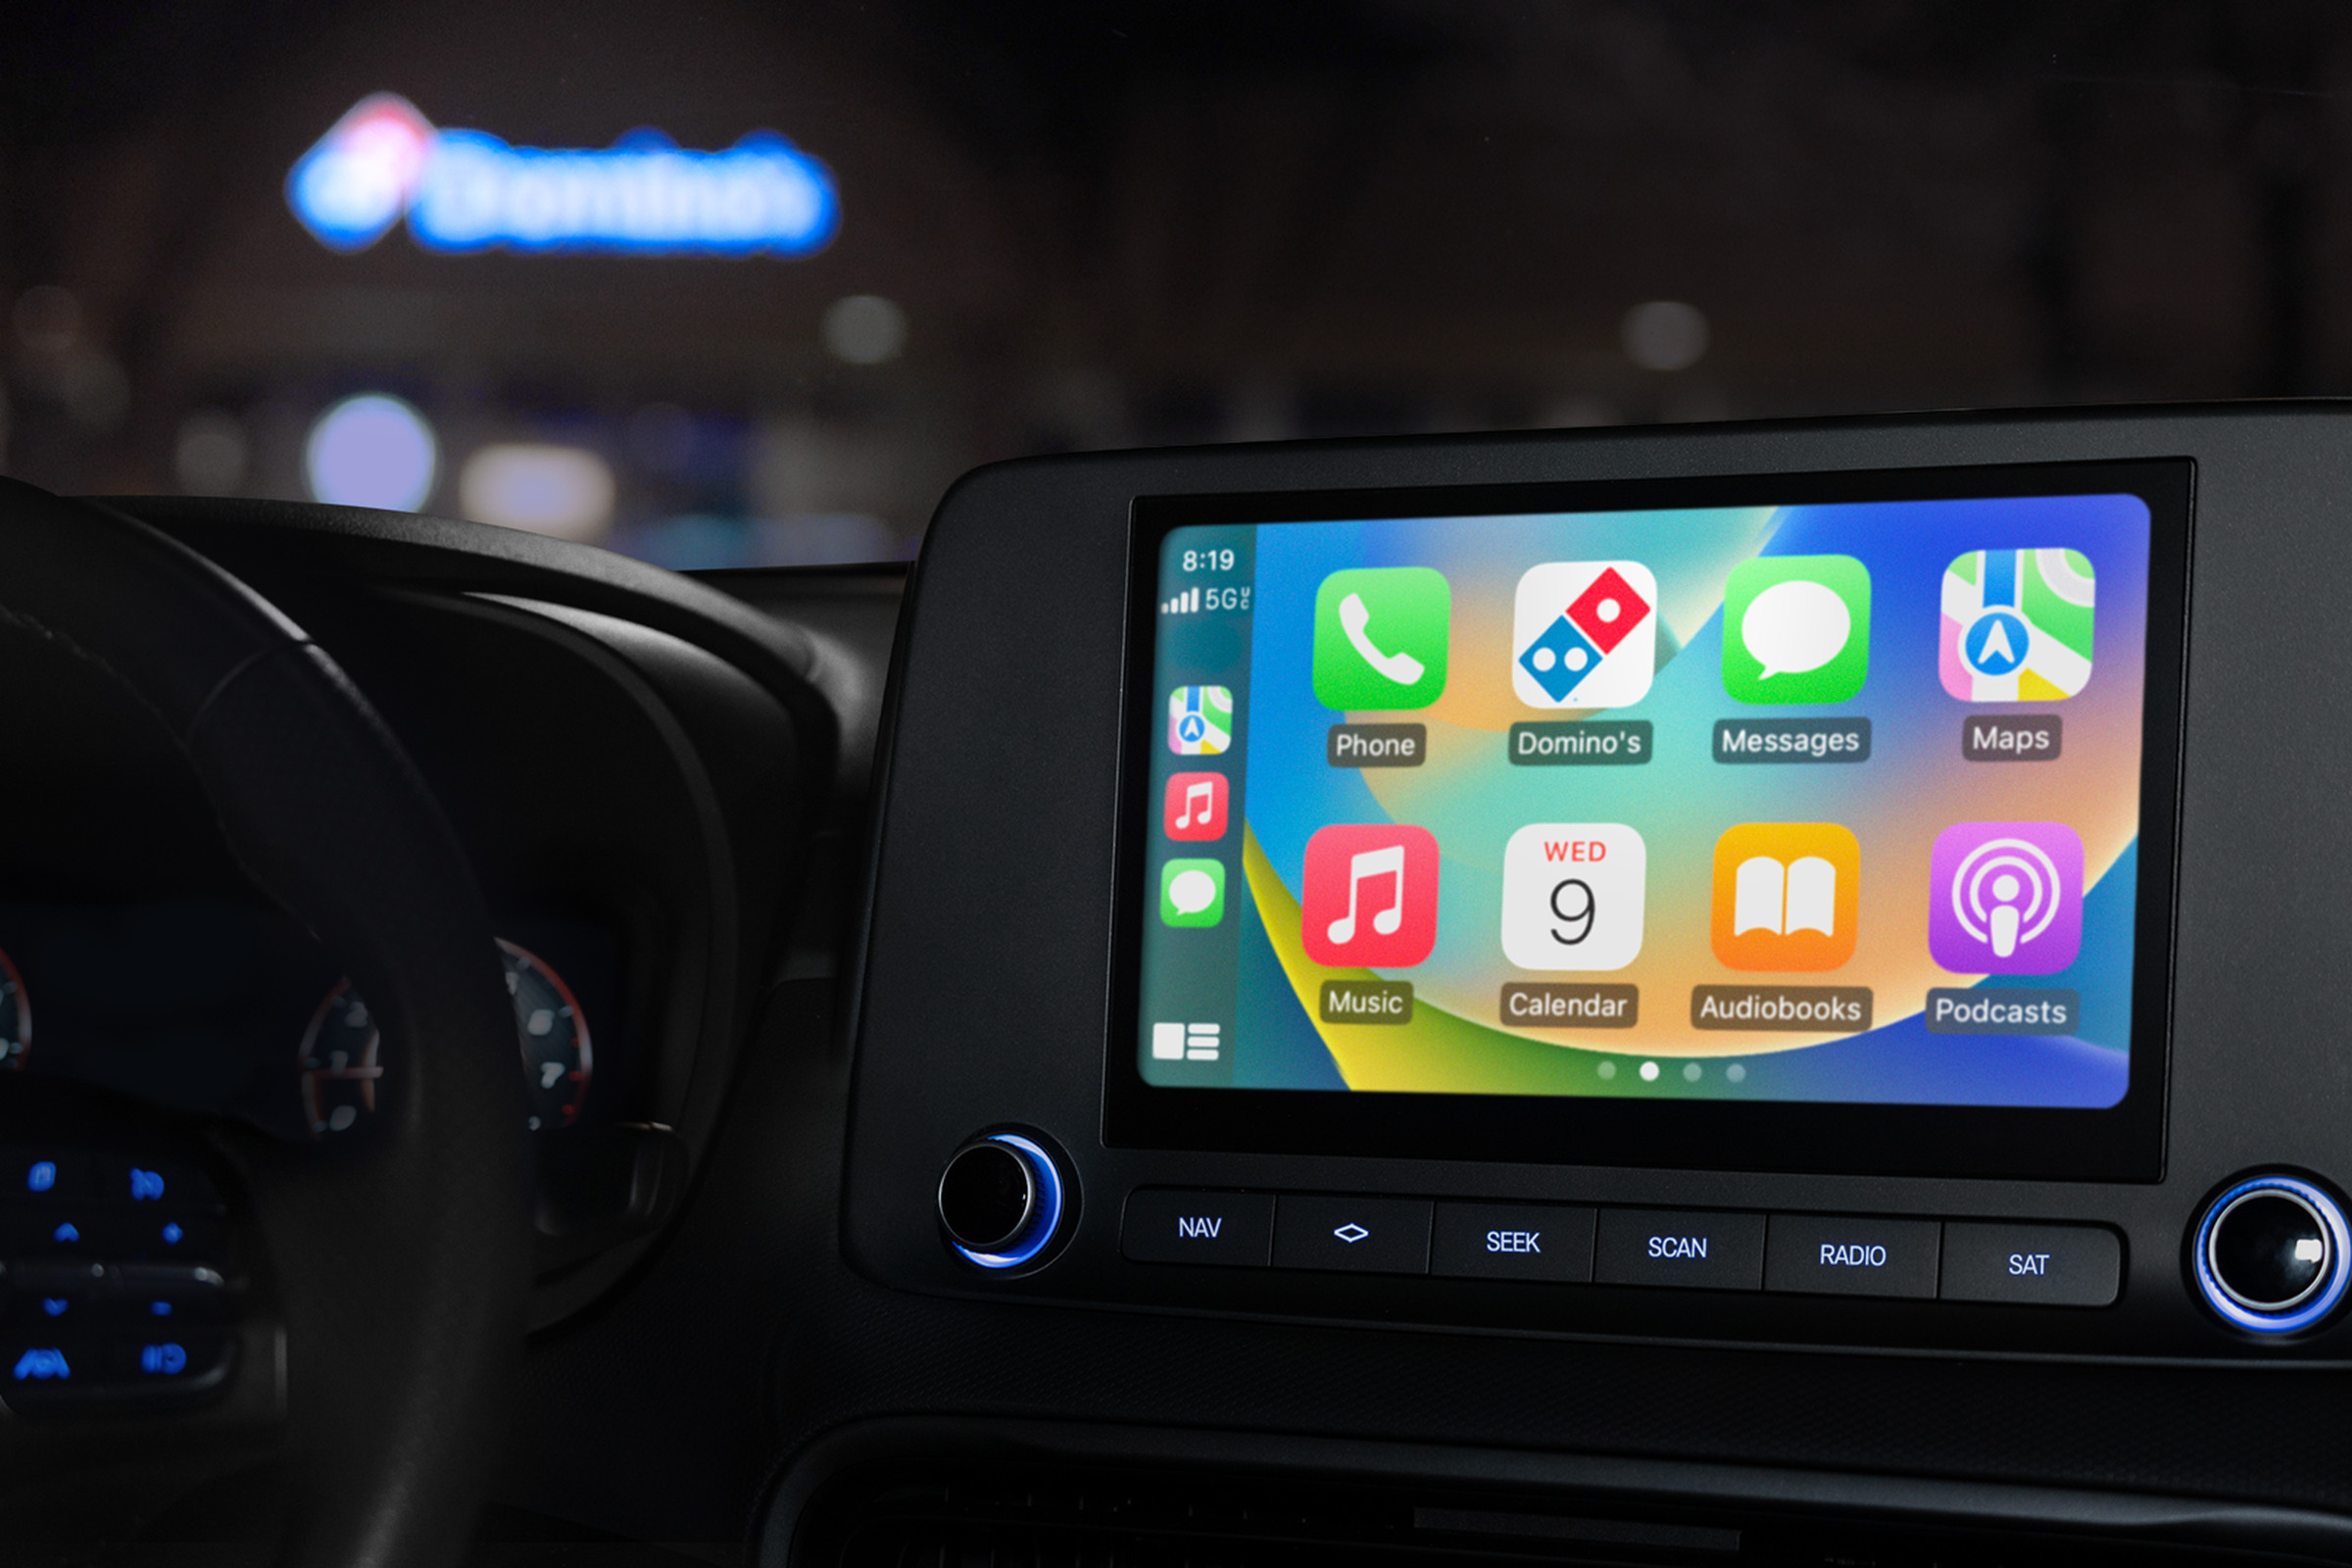 CarPlay screen in a car with the domino’s app in the grid